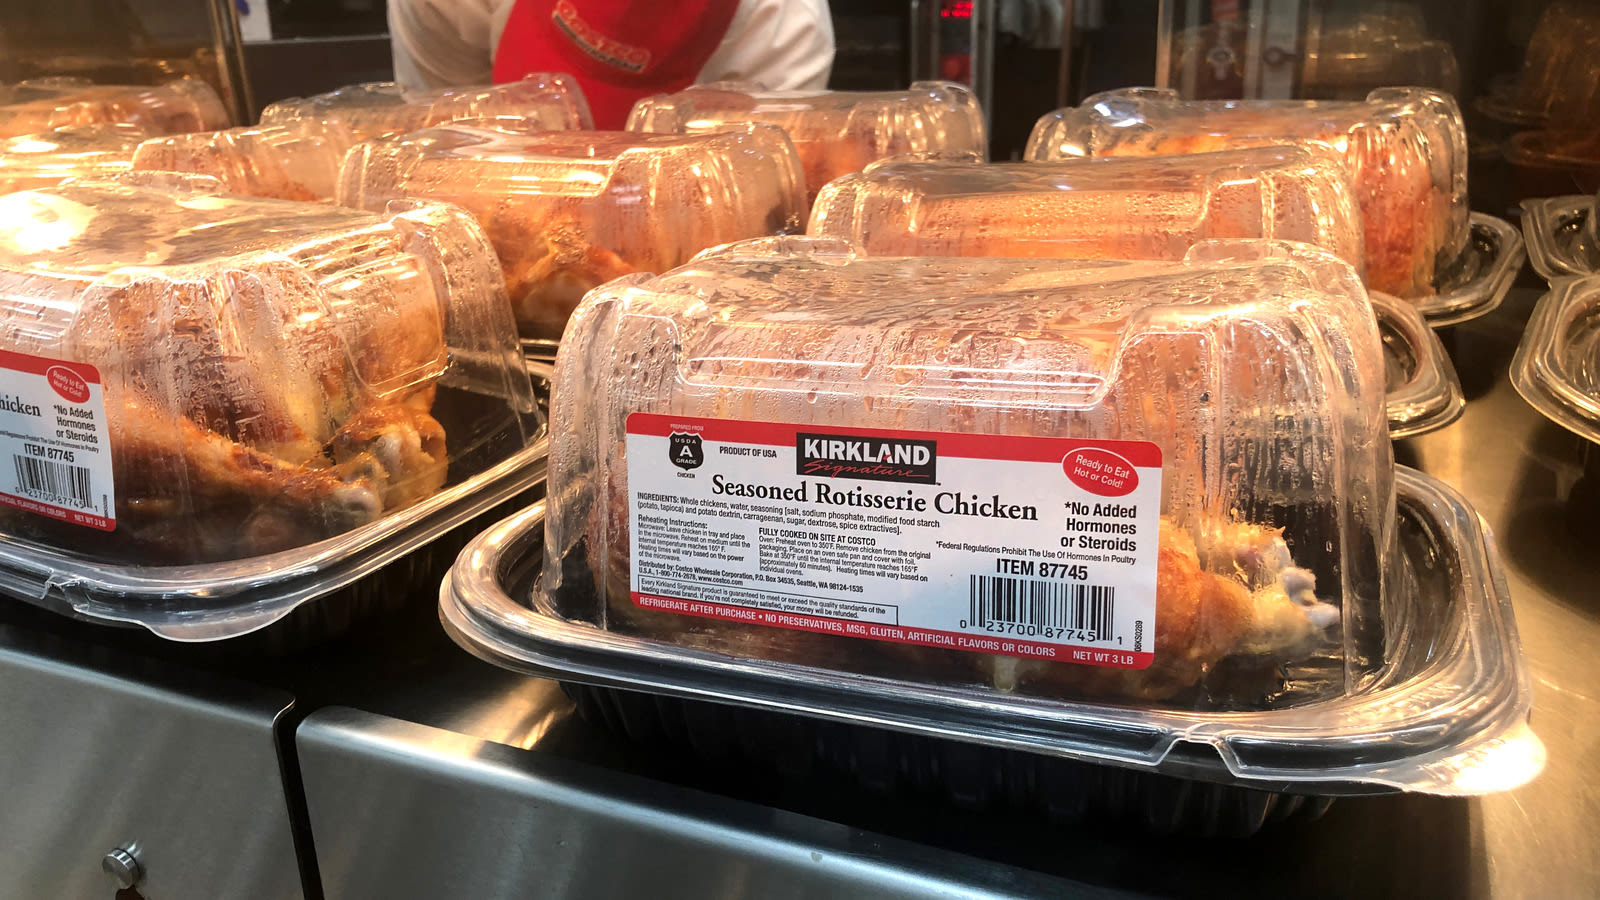 What Does Costco Do With Rotisserie Chickens That Sit Out Past Their Prime?